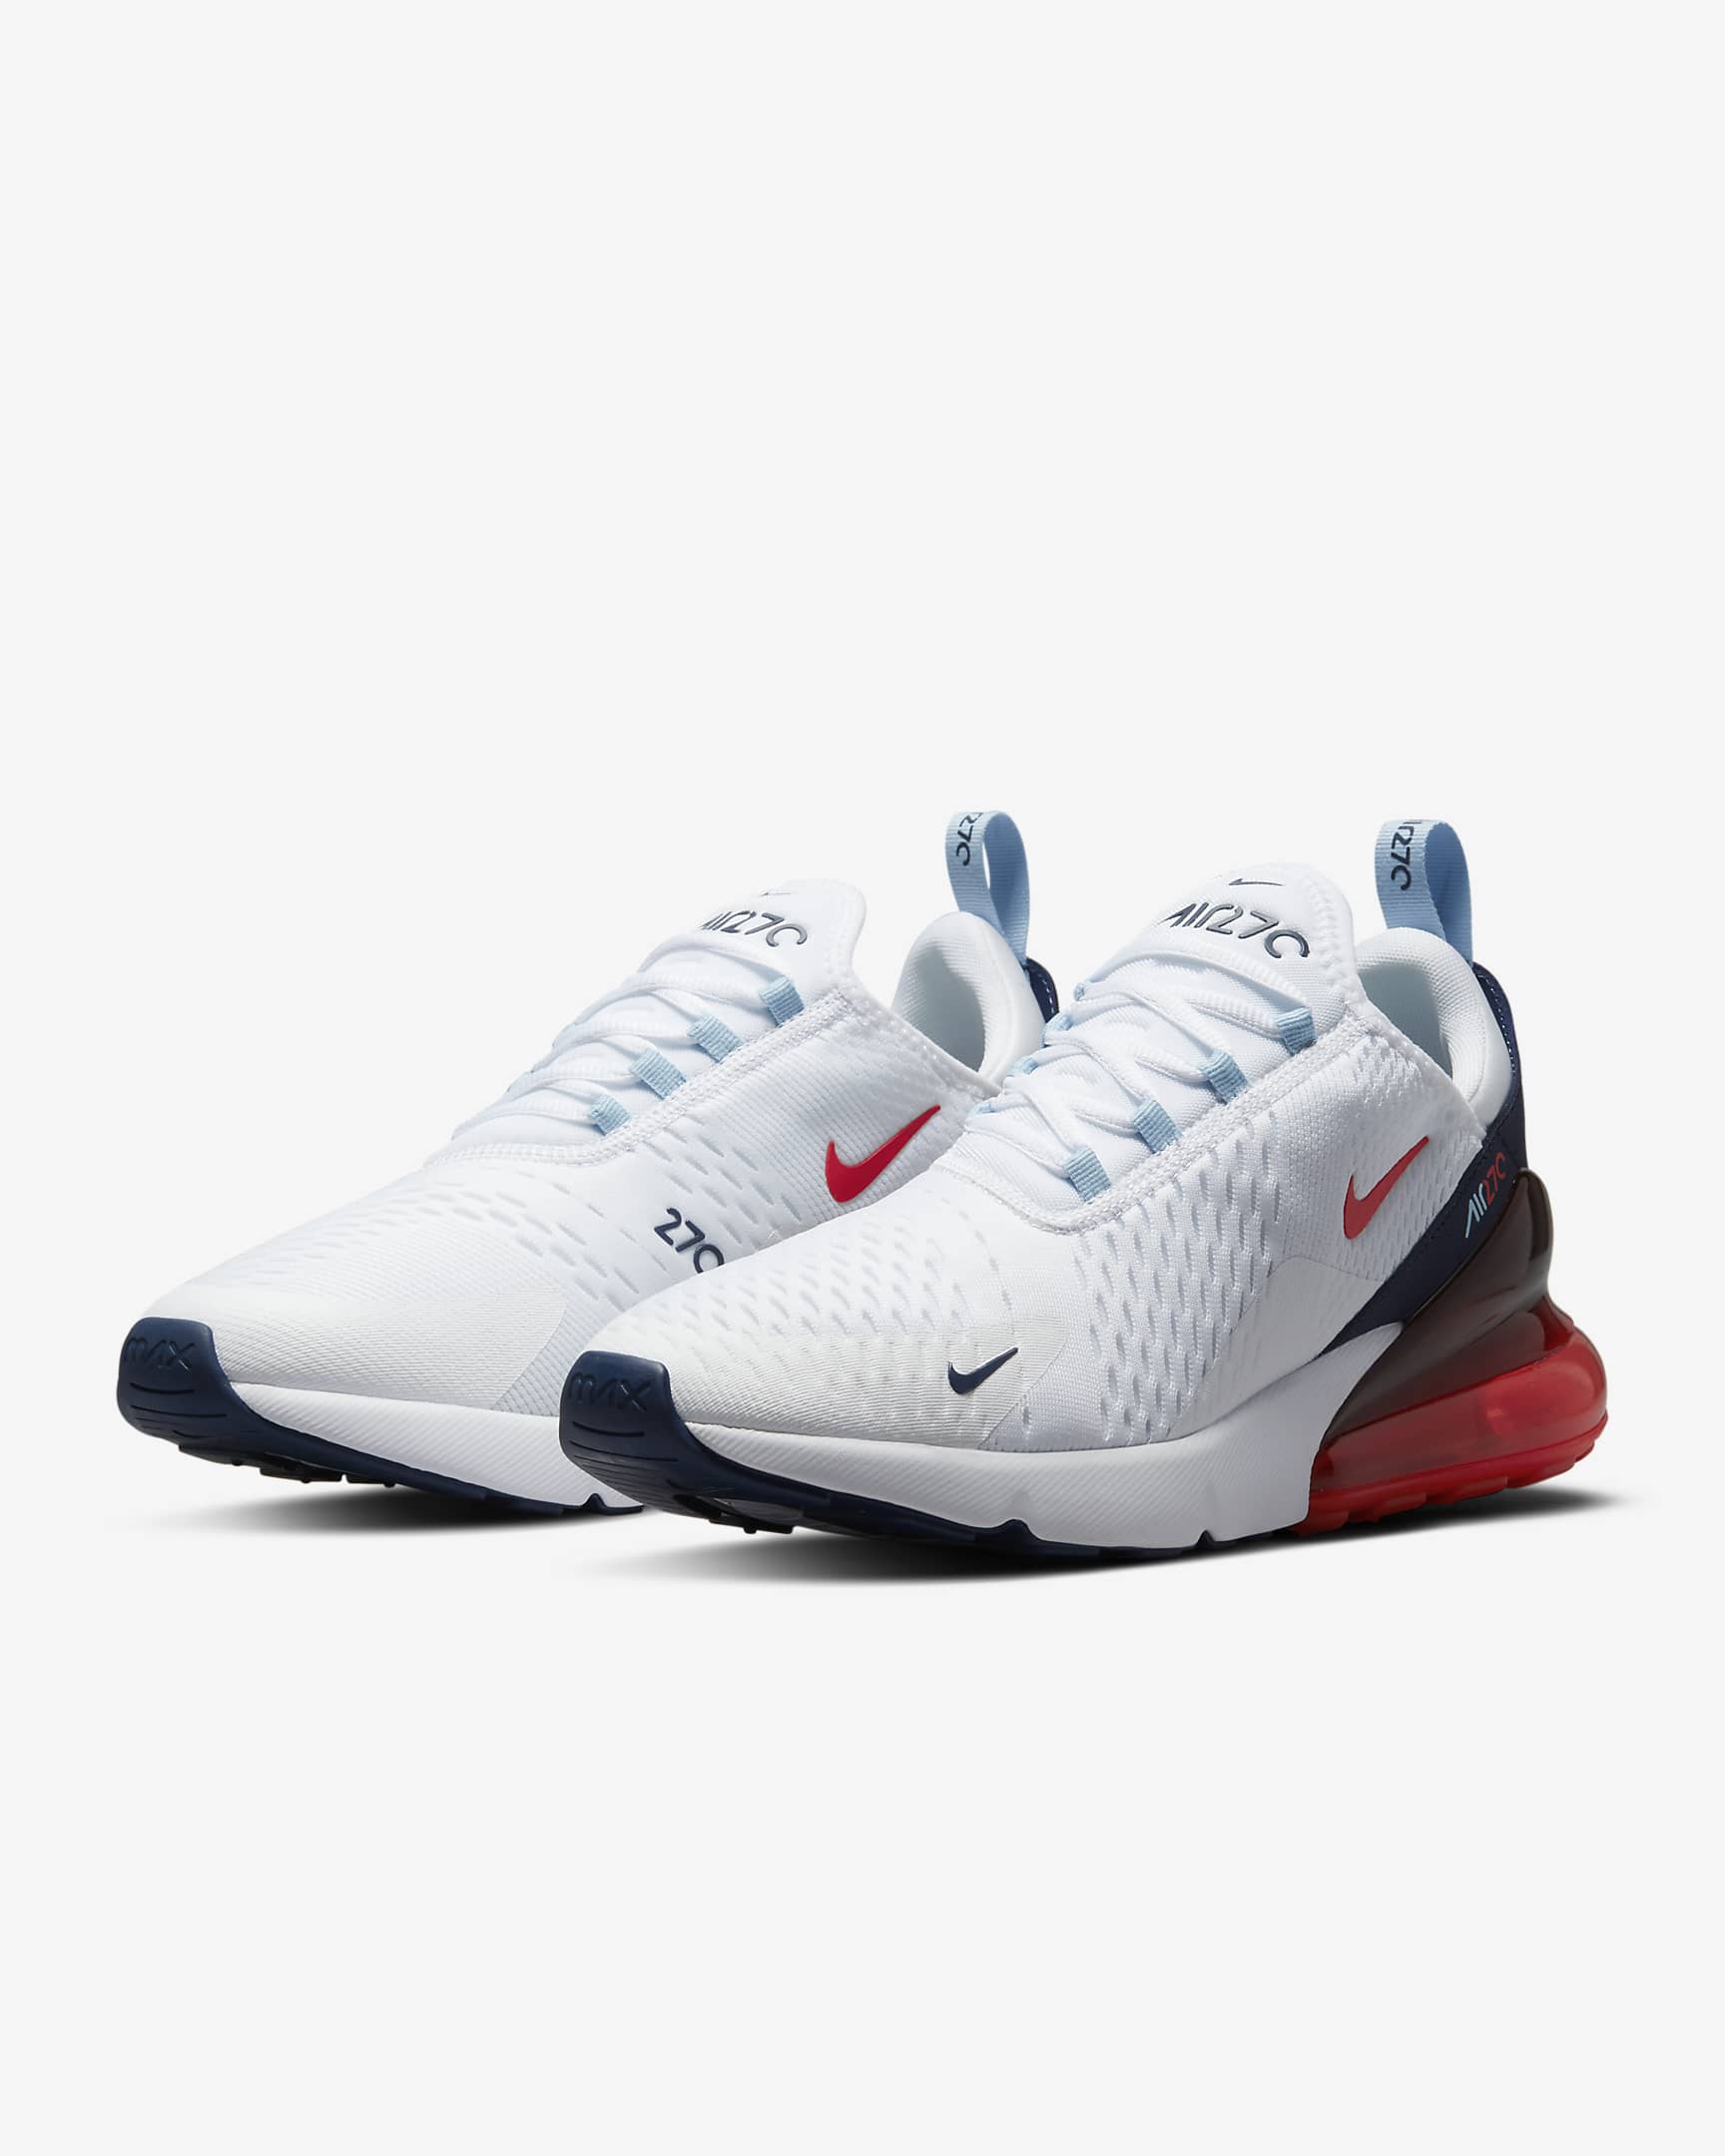 With the white background, a pair of Nike Air Max 270 are kept. The sole of the shoes is of black, white and red colour. Rest of the upper body of shoe is white in colour. 